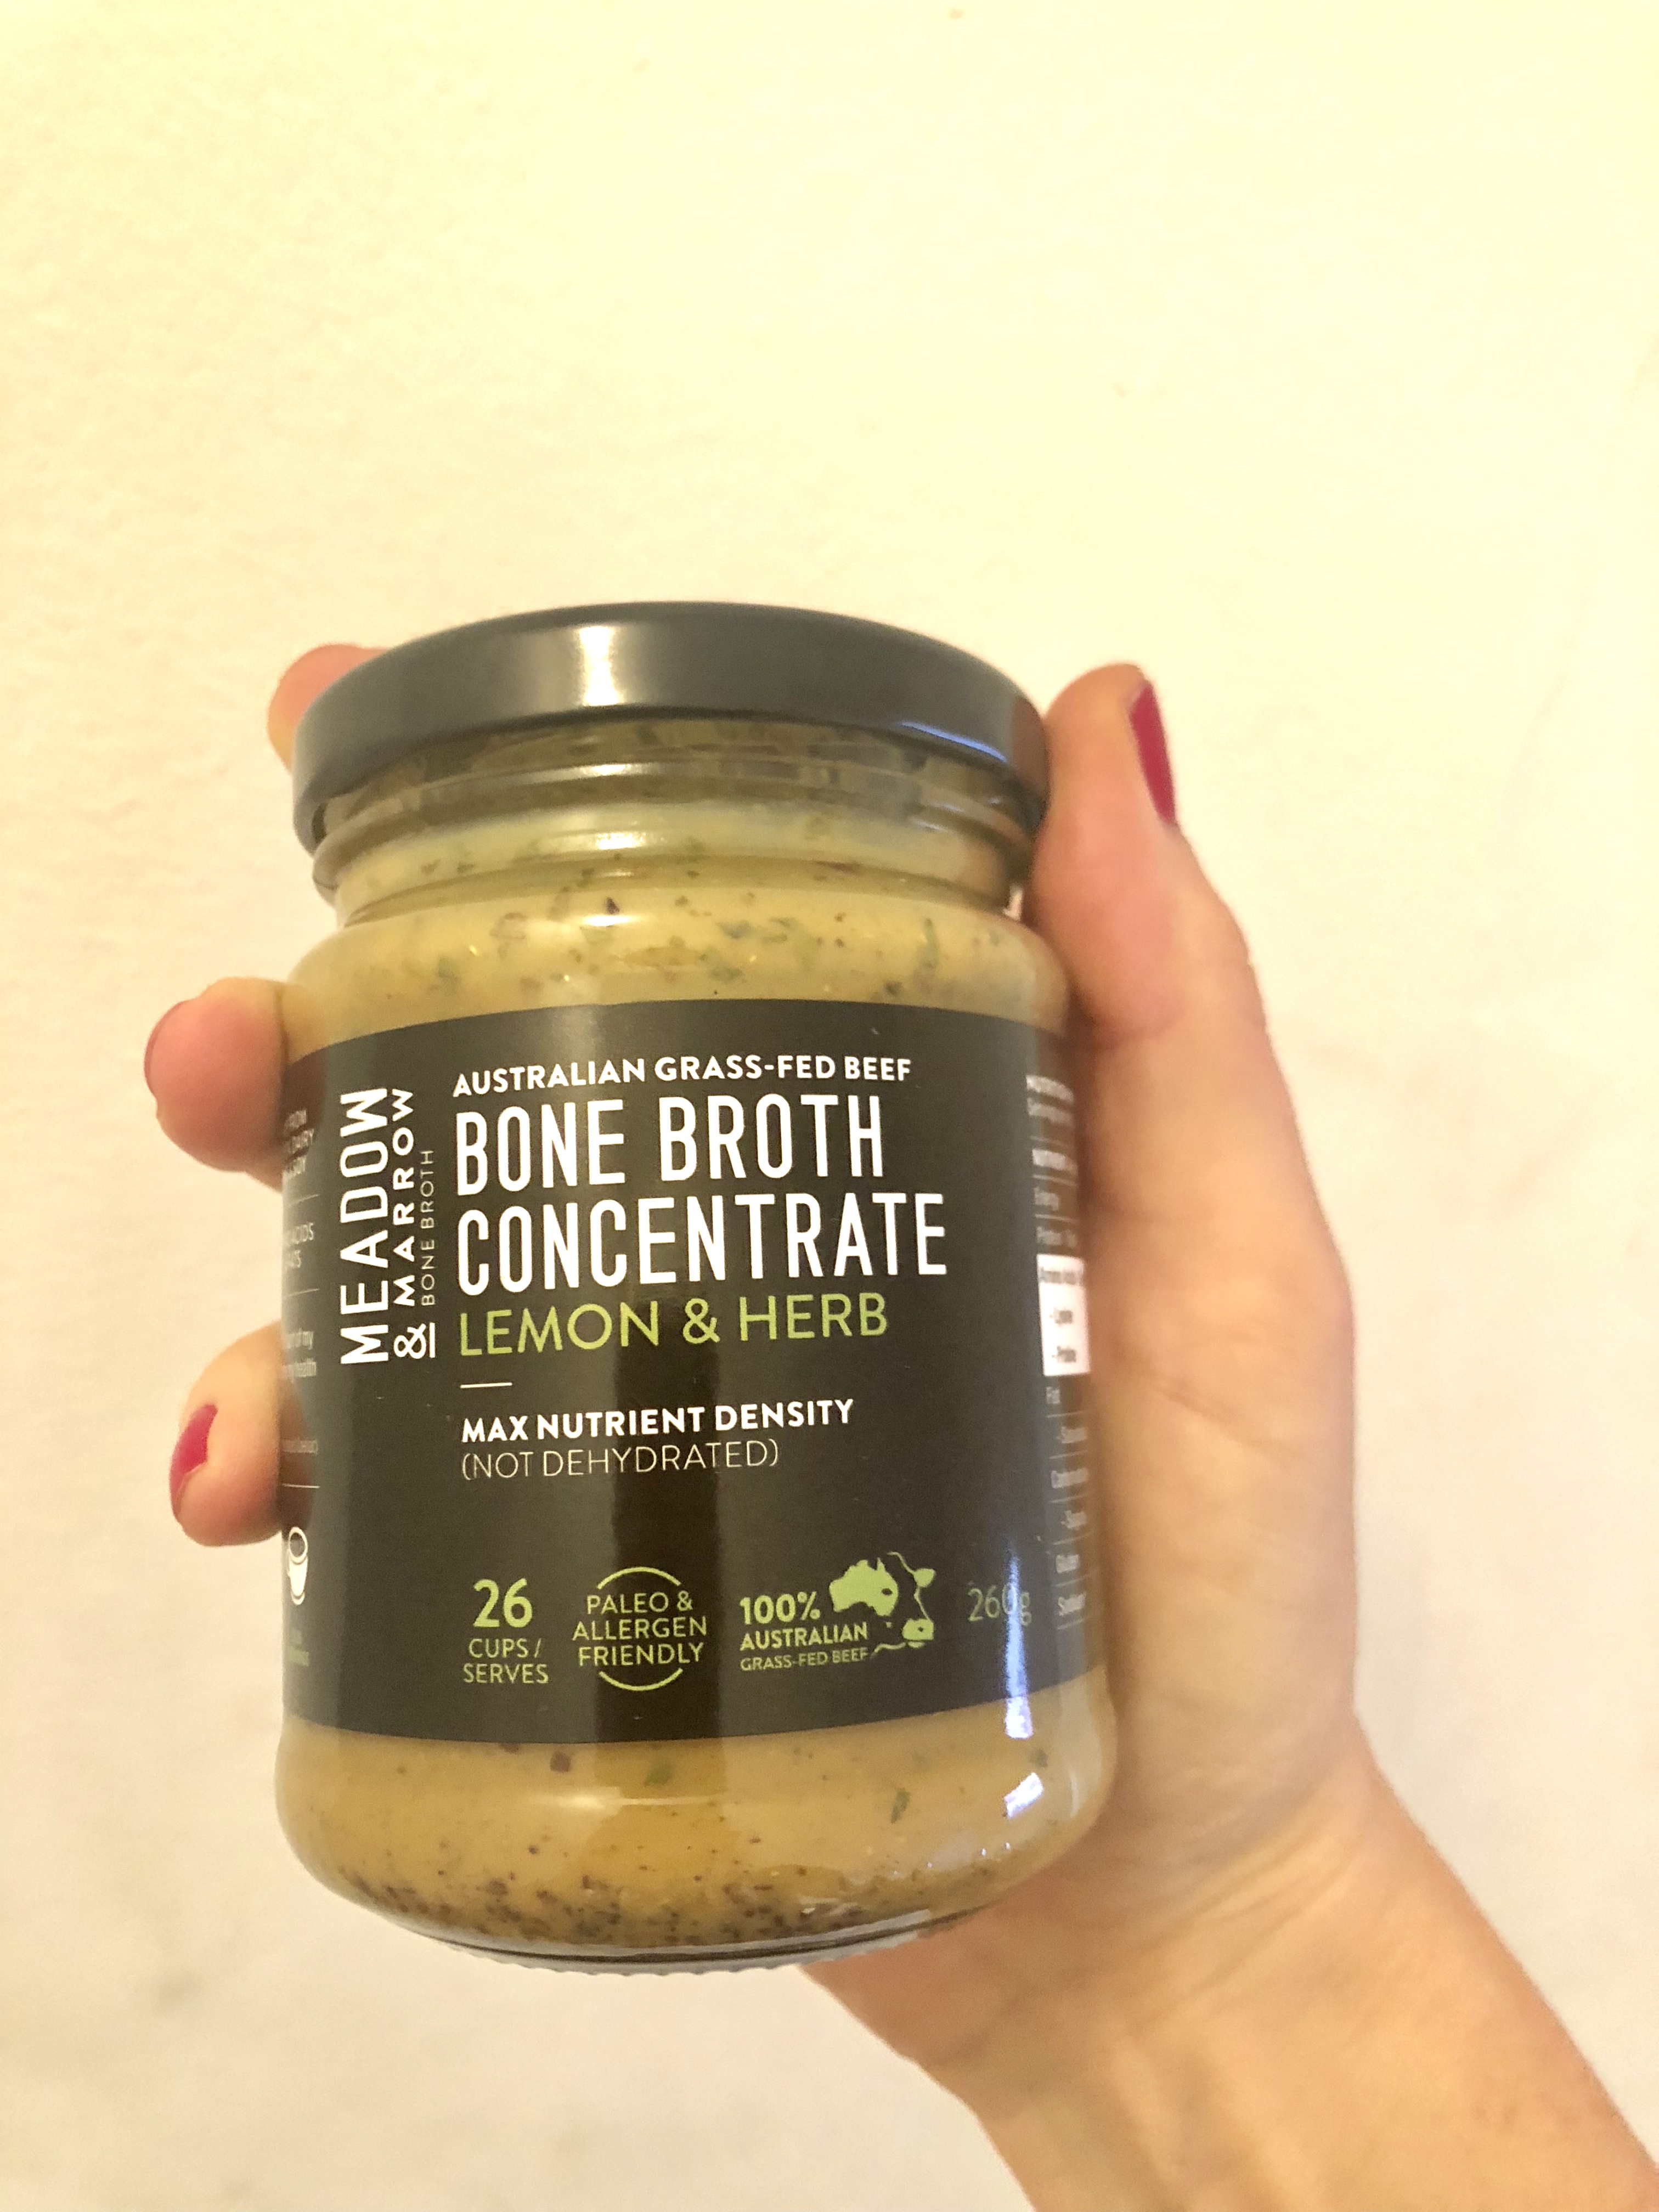 Bone broth concentrate for collagen and gut health